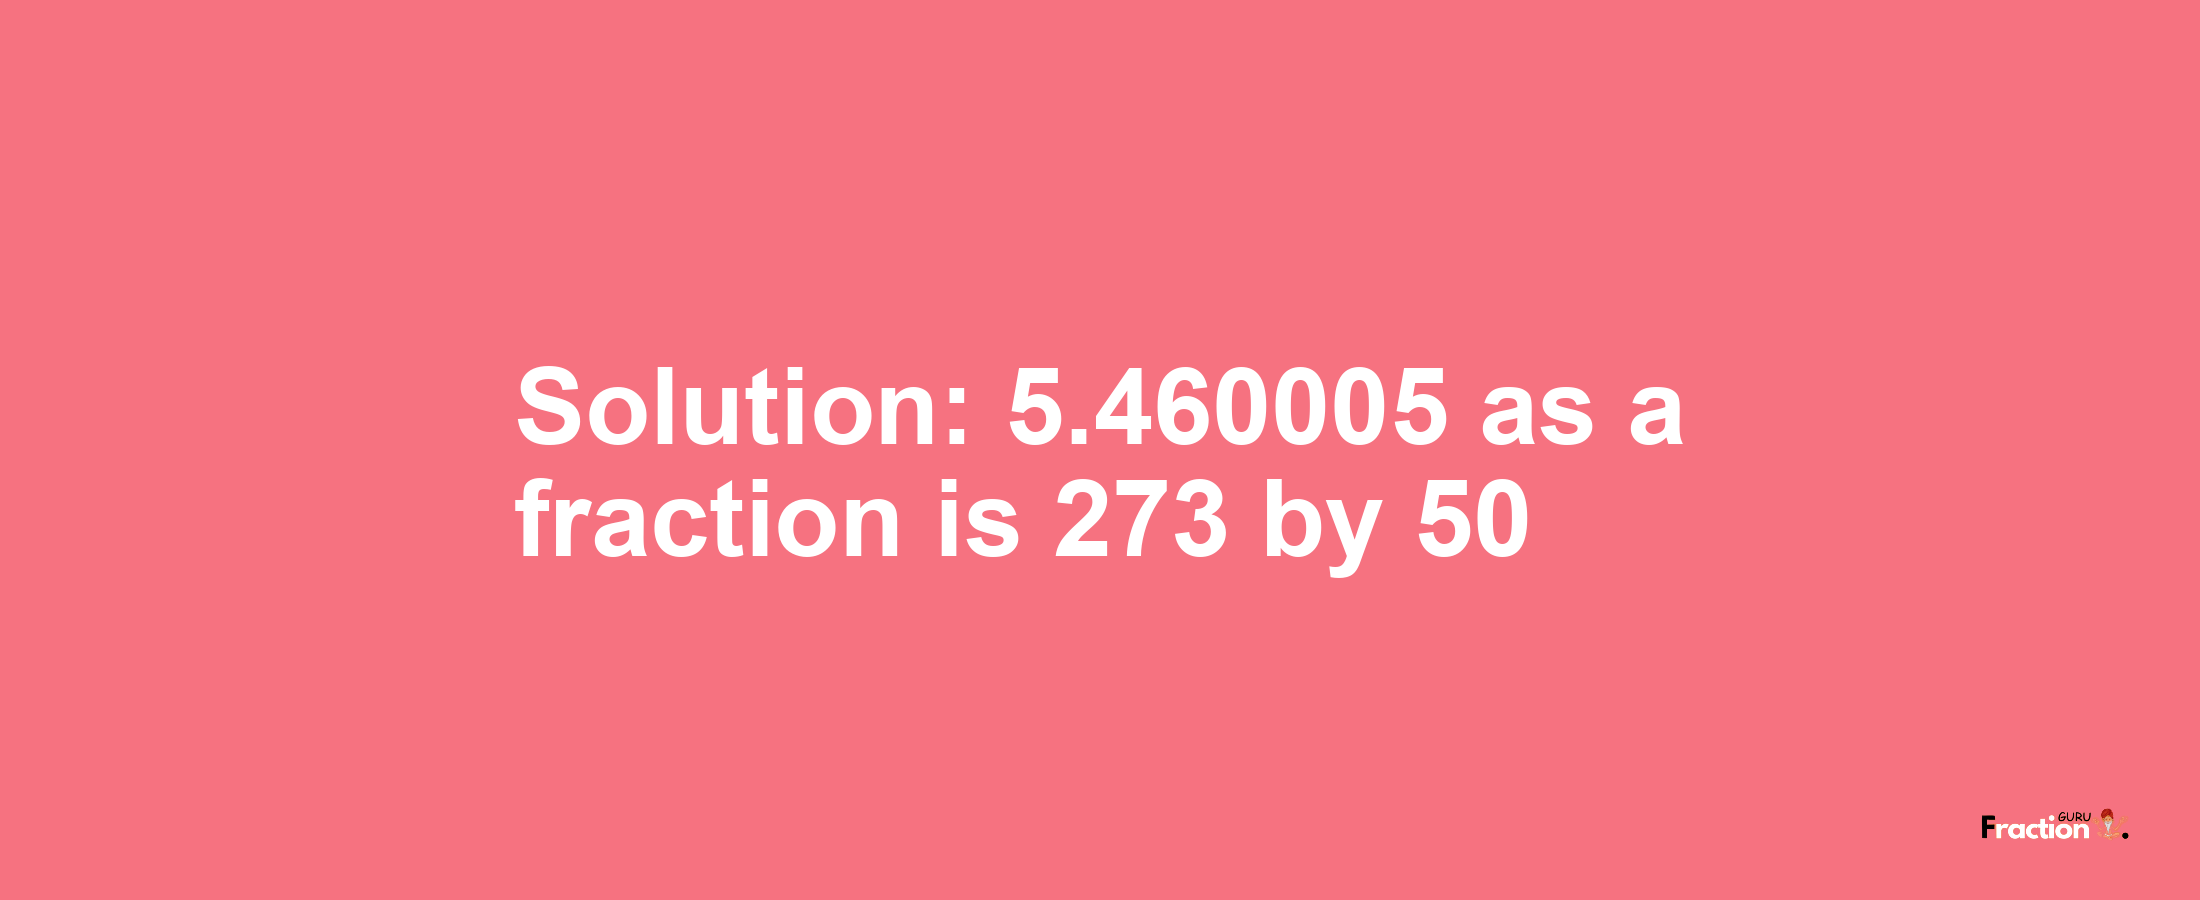 Solution:5.460005 as a fraction is 273/50